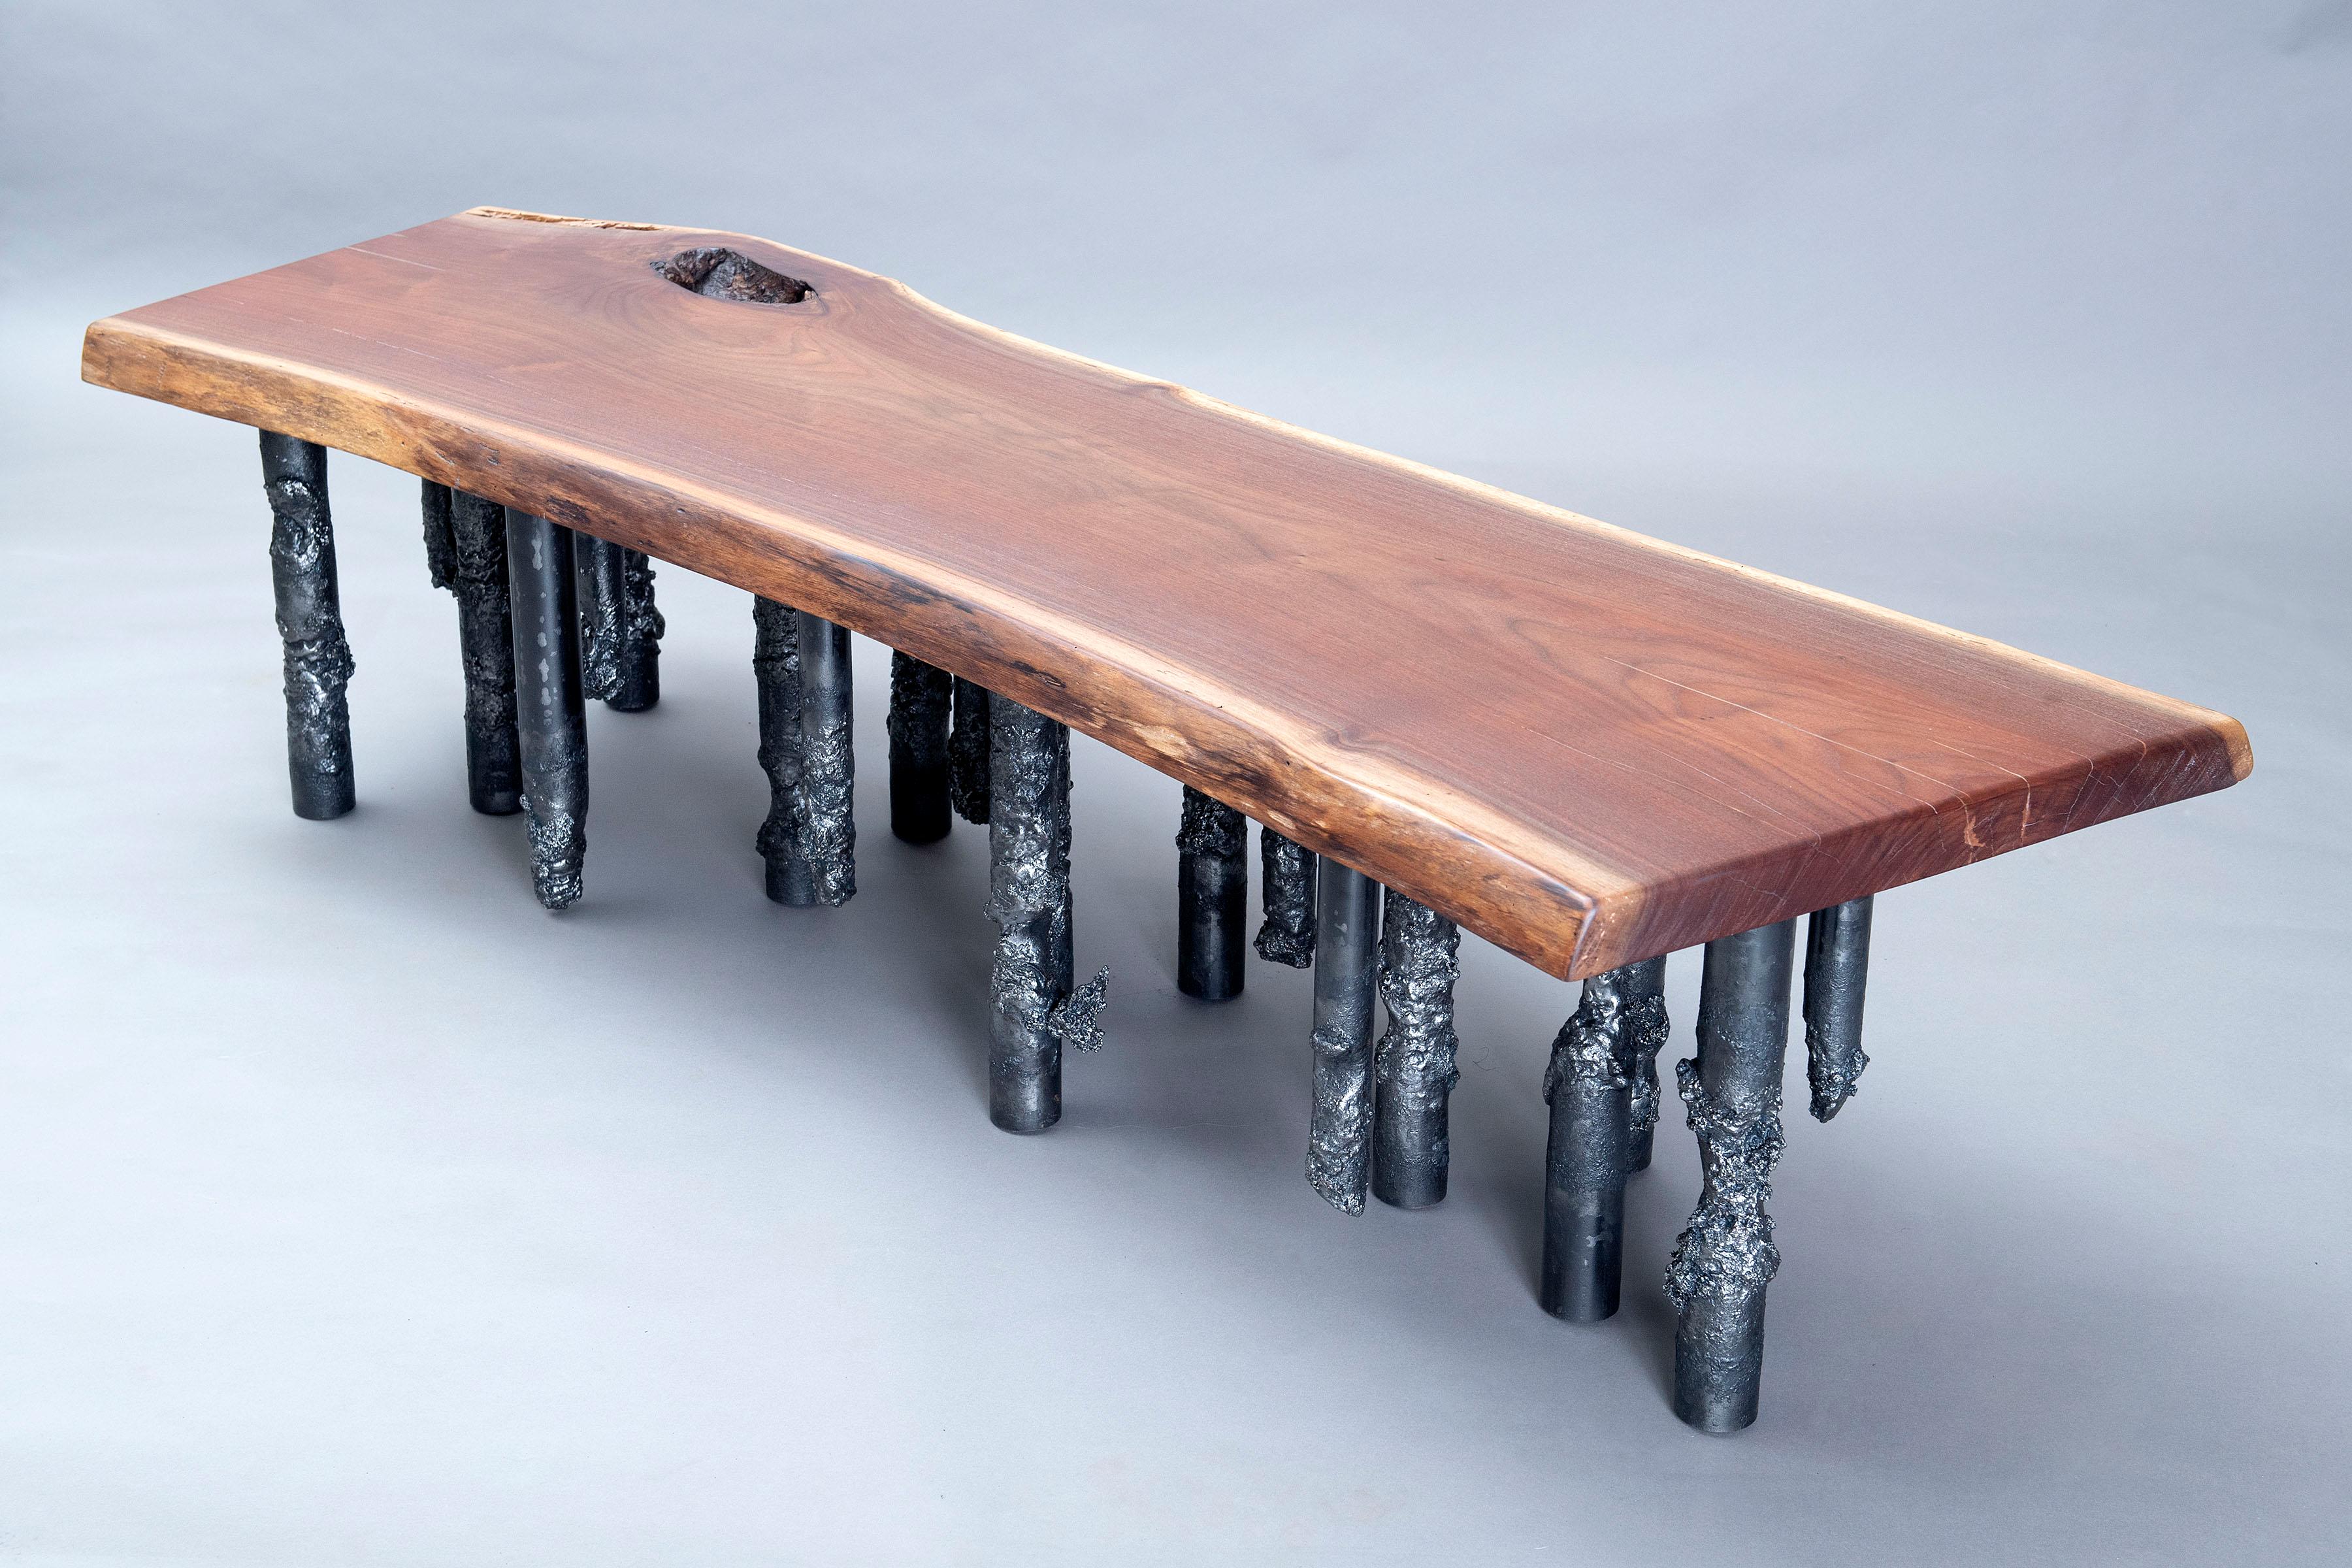 American Handcrafted Artisan Walnut And Steel One Of A Kind Sculptural Industrial Bench For Sale